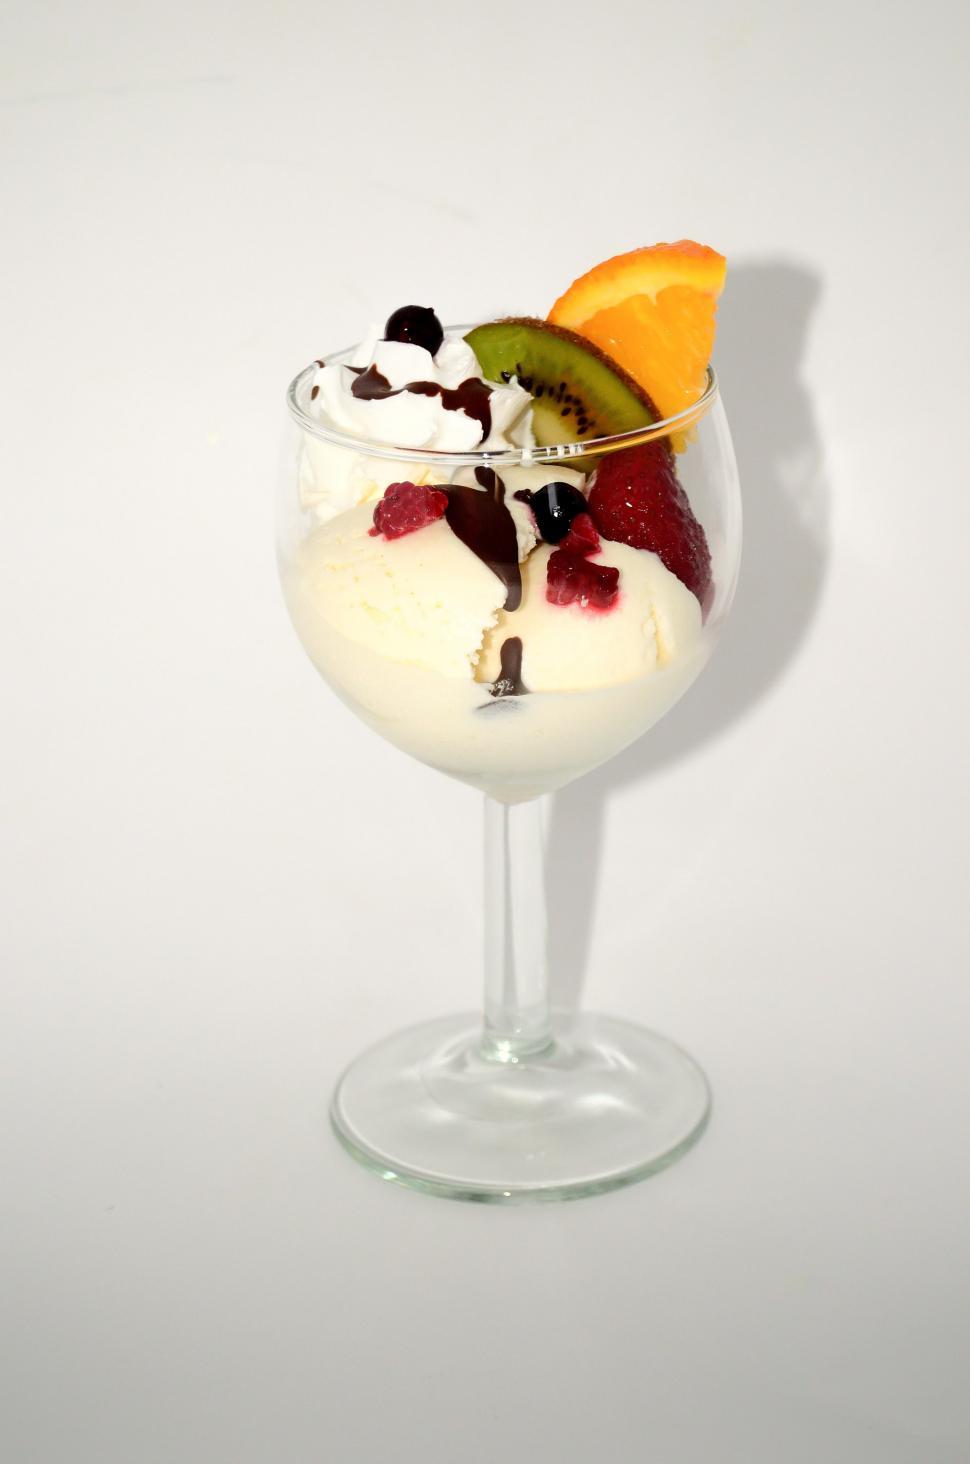 Free Image of Glass Filled With Ice Cream and Fruit 